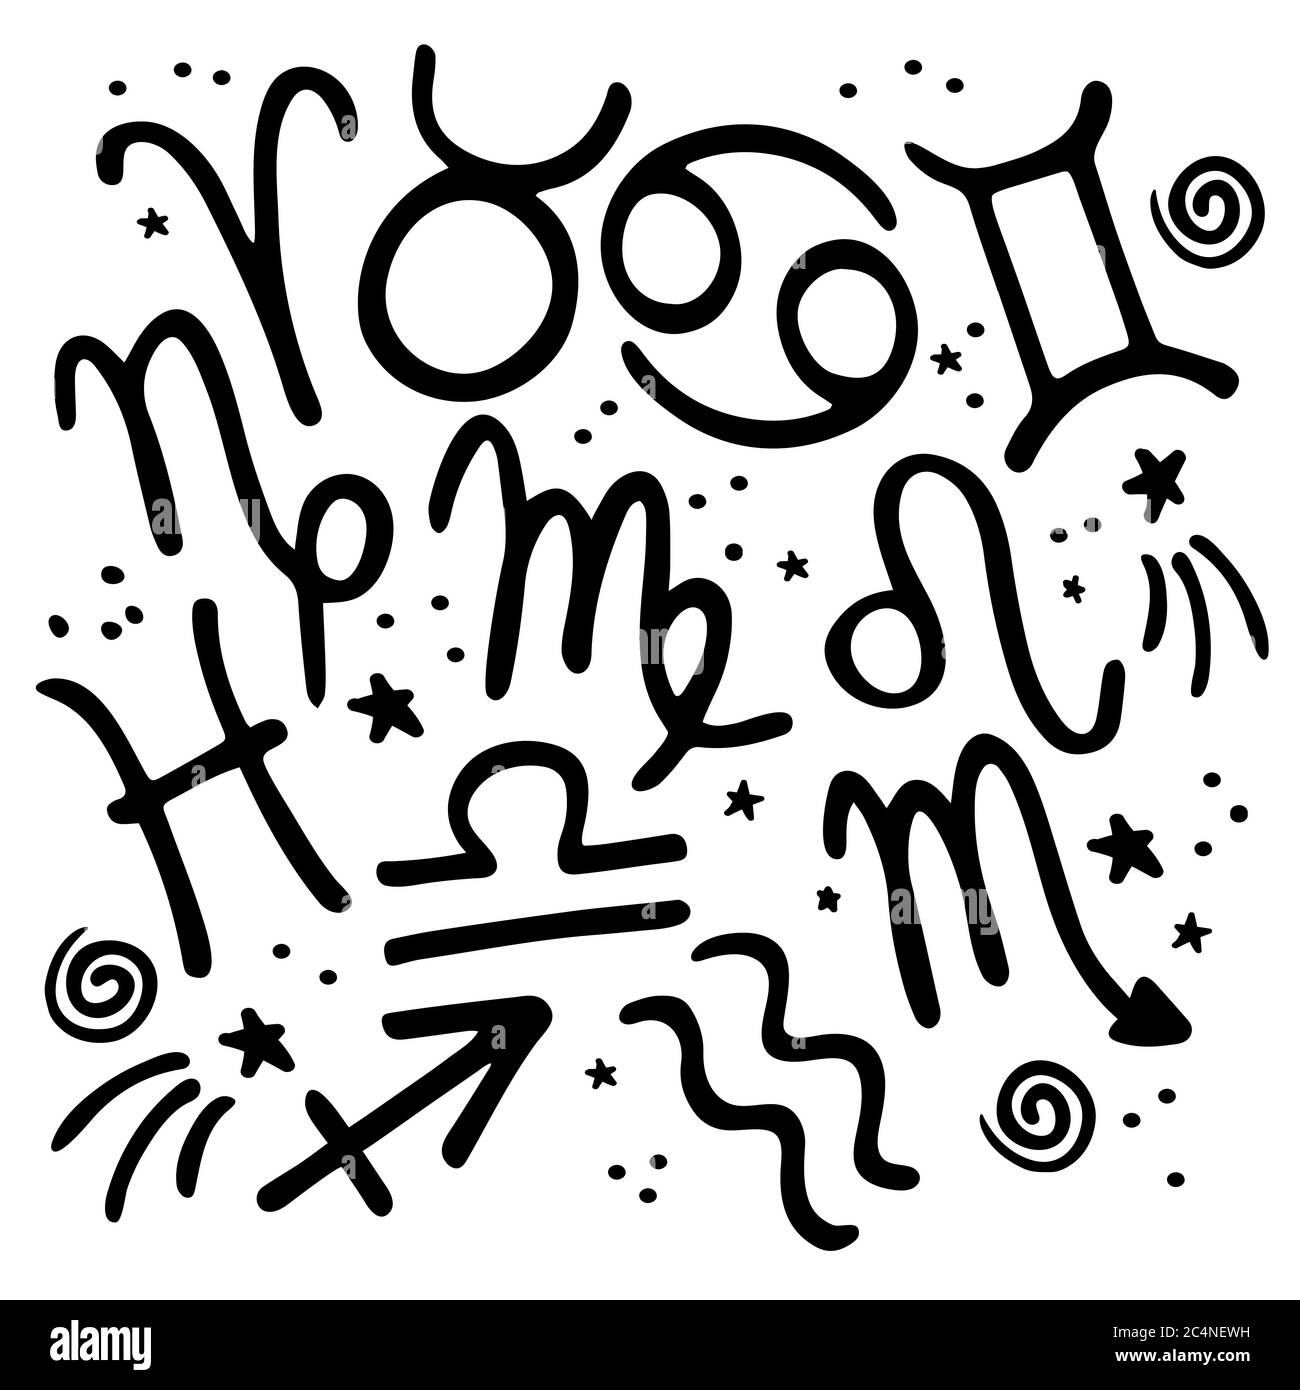 Zodiac signs concept with hand drawn elements. Banner, poster, card with horoscope signs. Black on white Stock Vector